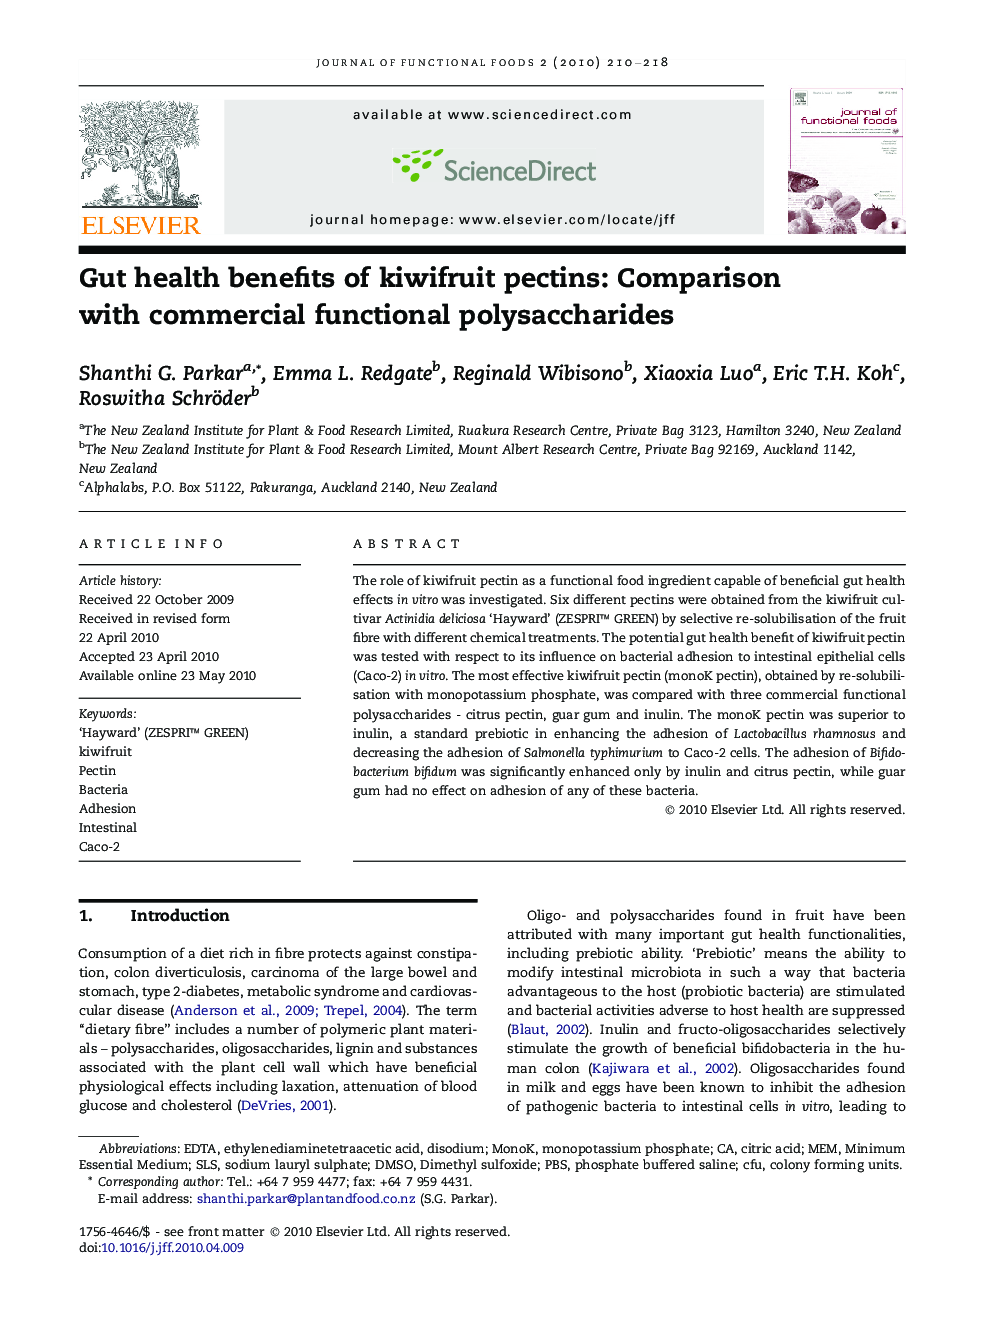 Gut health benefits of kiwifruit pectins: Comparison with commercial functional polysaccharides